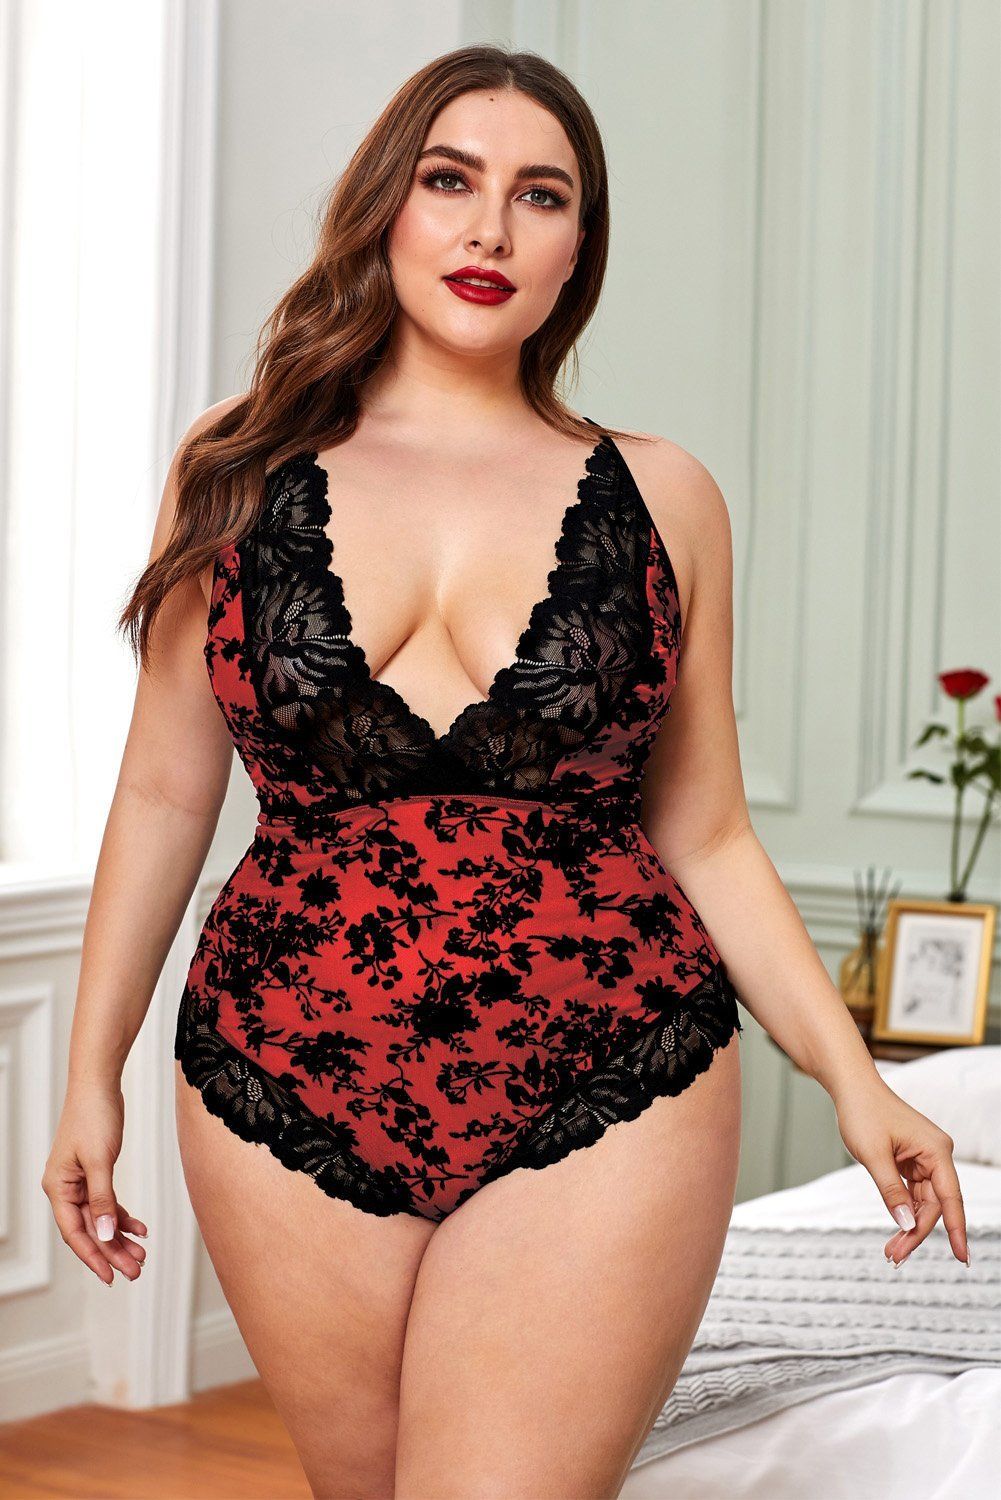 Add a daring yet dainty touch to your lingerie collection with this flirty . plus size teddy Plunging V-neckline with a sheer lace trim Adjustable criss-cross spaghetti straps with a tie back closure All over flocked purple and black floral Thin elastic waistline, a thick lace hem Satin lace-up back panel and a cheeky cut back